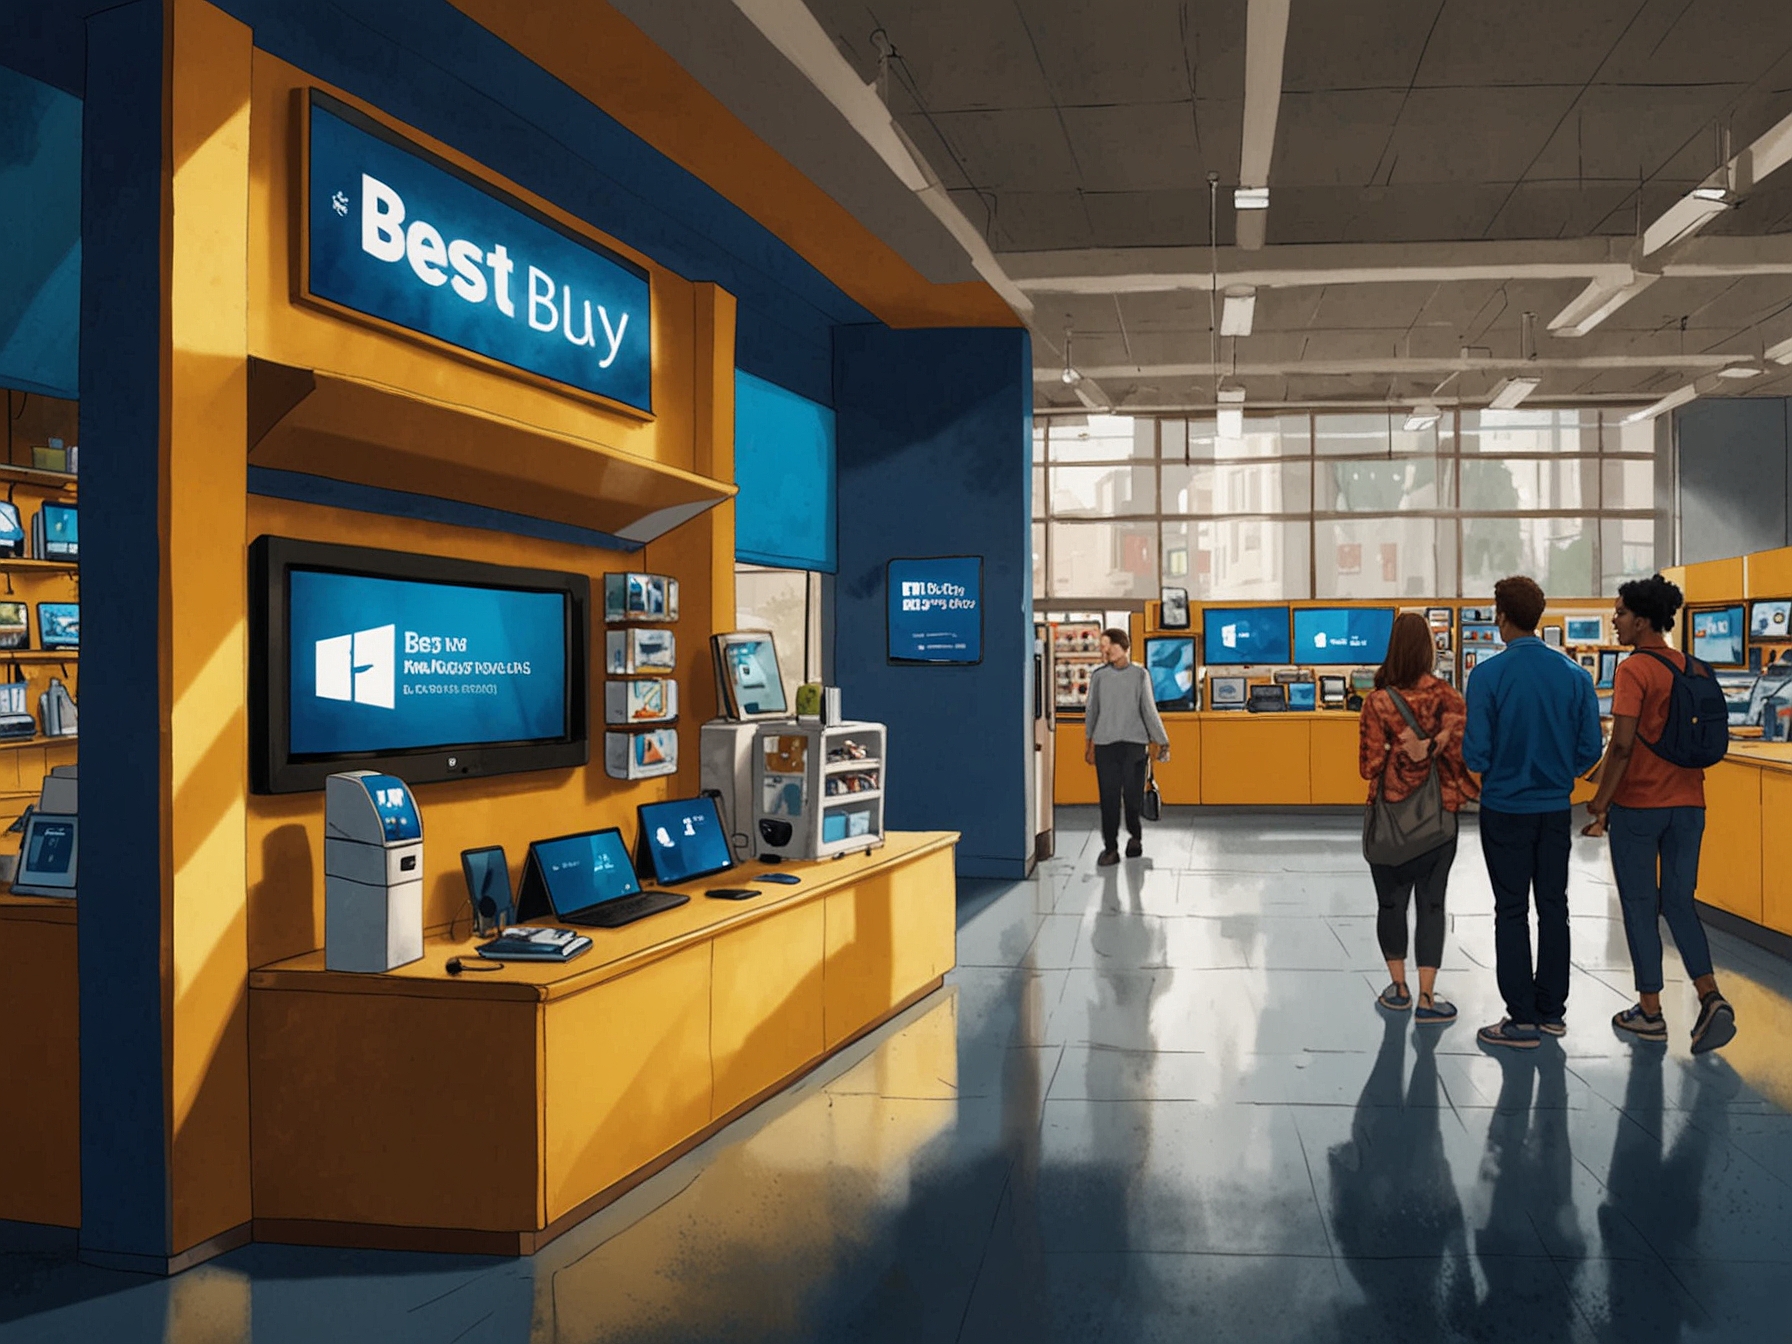 A vibrant graphic showcasing Best Buy's Member Deals Days, highlighting up to $600 off on Apple products and other tech gadgets, emphasizing the exclusive member benefits.